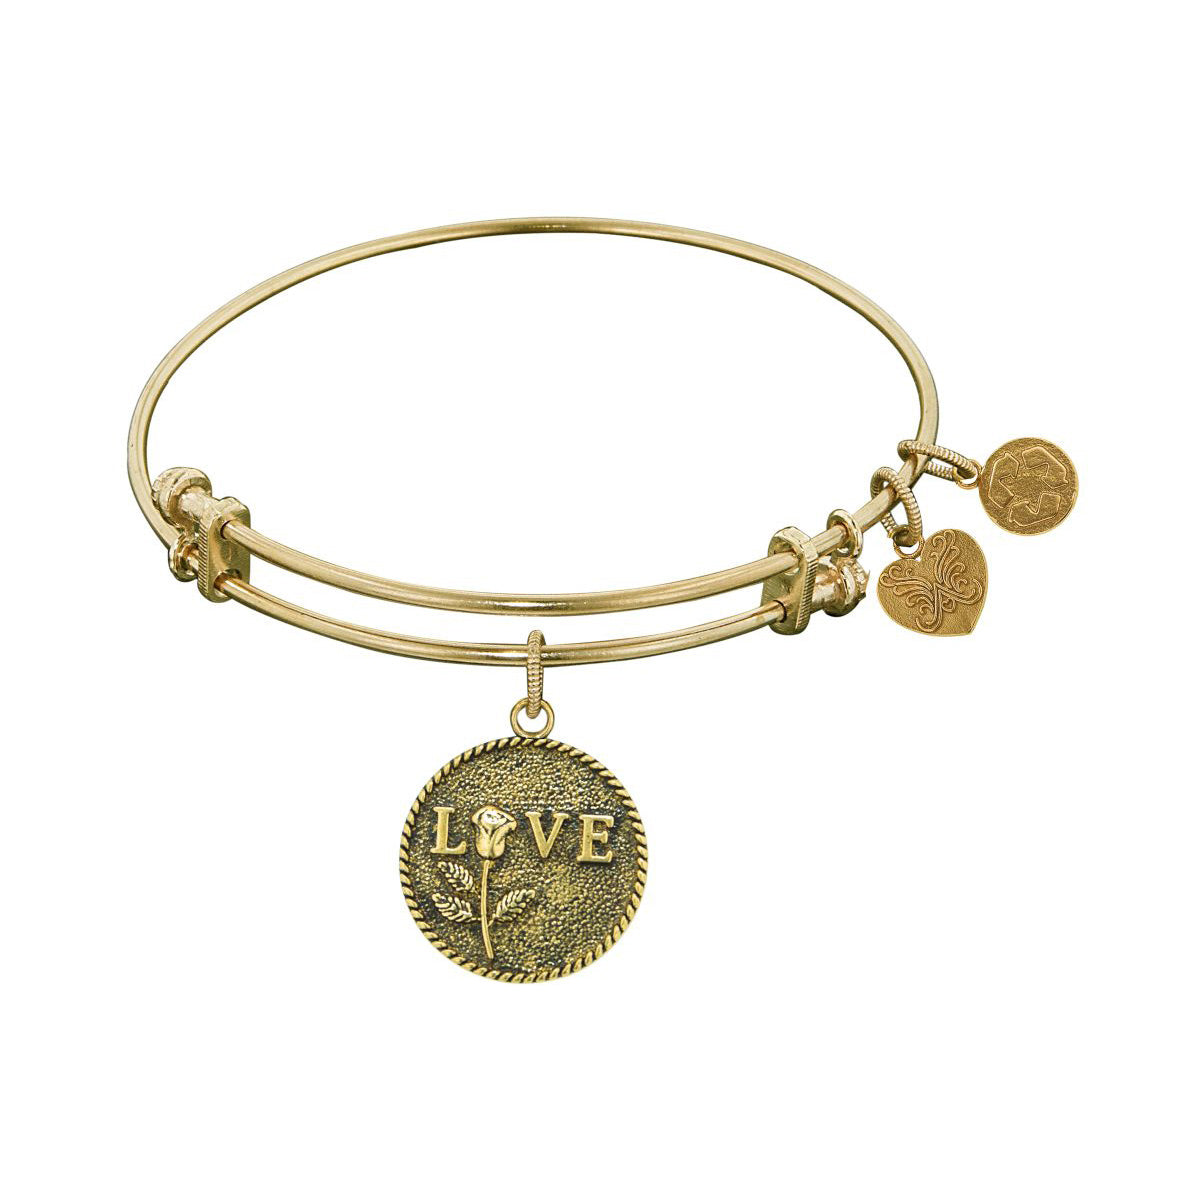 Stipple Finish Brass Love With Rose Angelica Bangle Bracelet, 7.25" fine designer jewelry for men and women